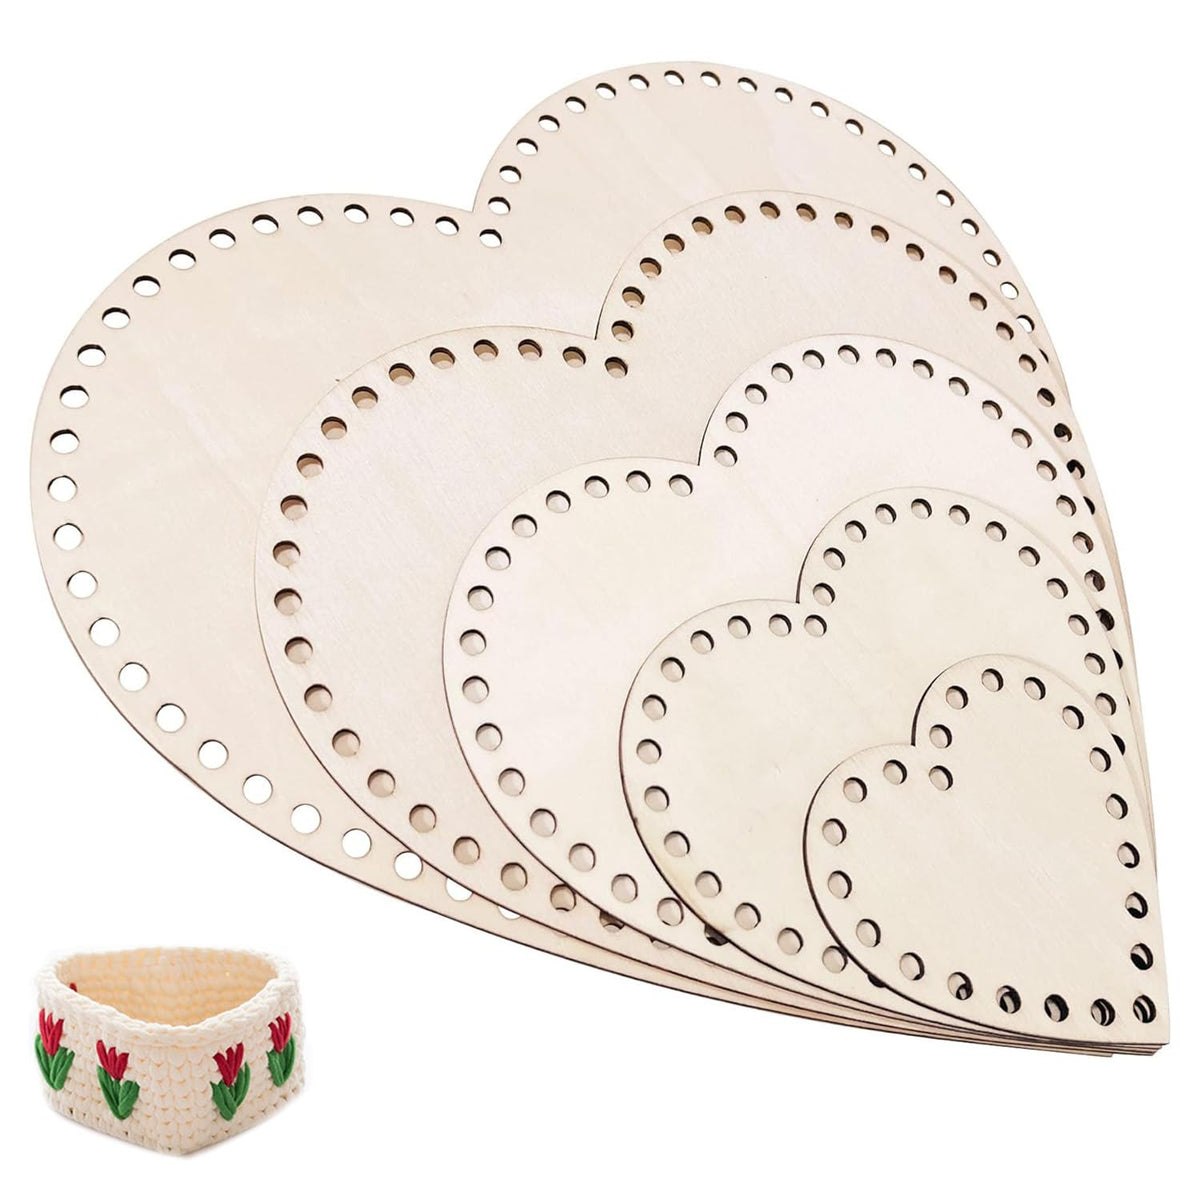 Haoser Heart-Shaped Crochet Knitting Basket Wood Base for DIY Basket Craft Weaving Making Supplies, Unfinished Wooden Base Laser Cut with Hole (5 Pieces, 5 Sizes) - Haoser